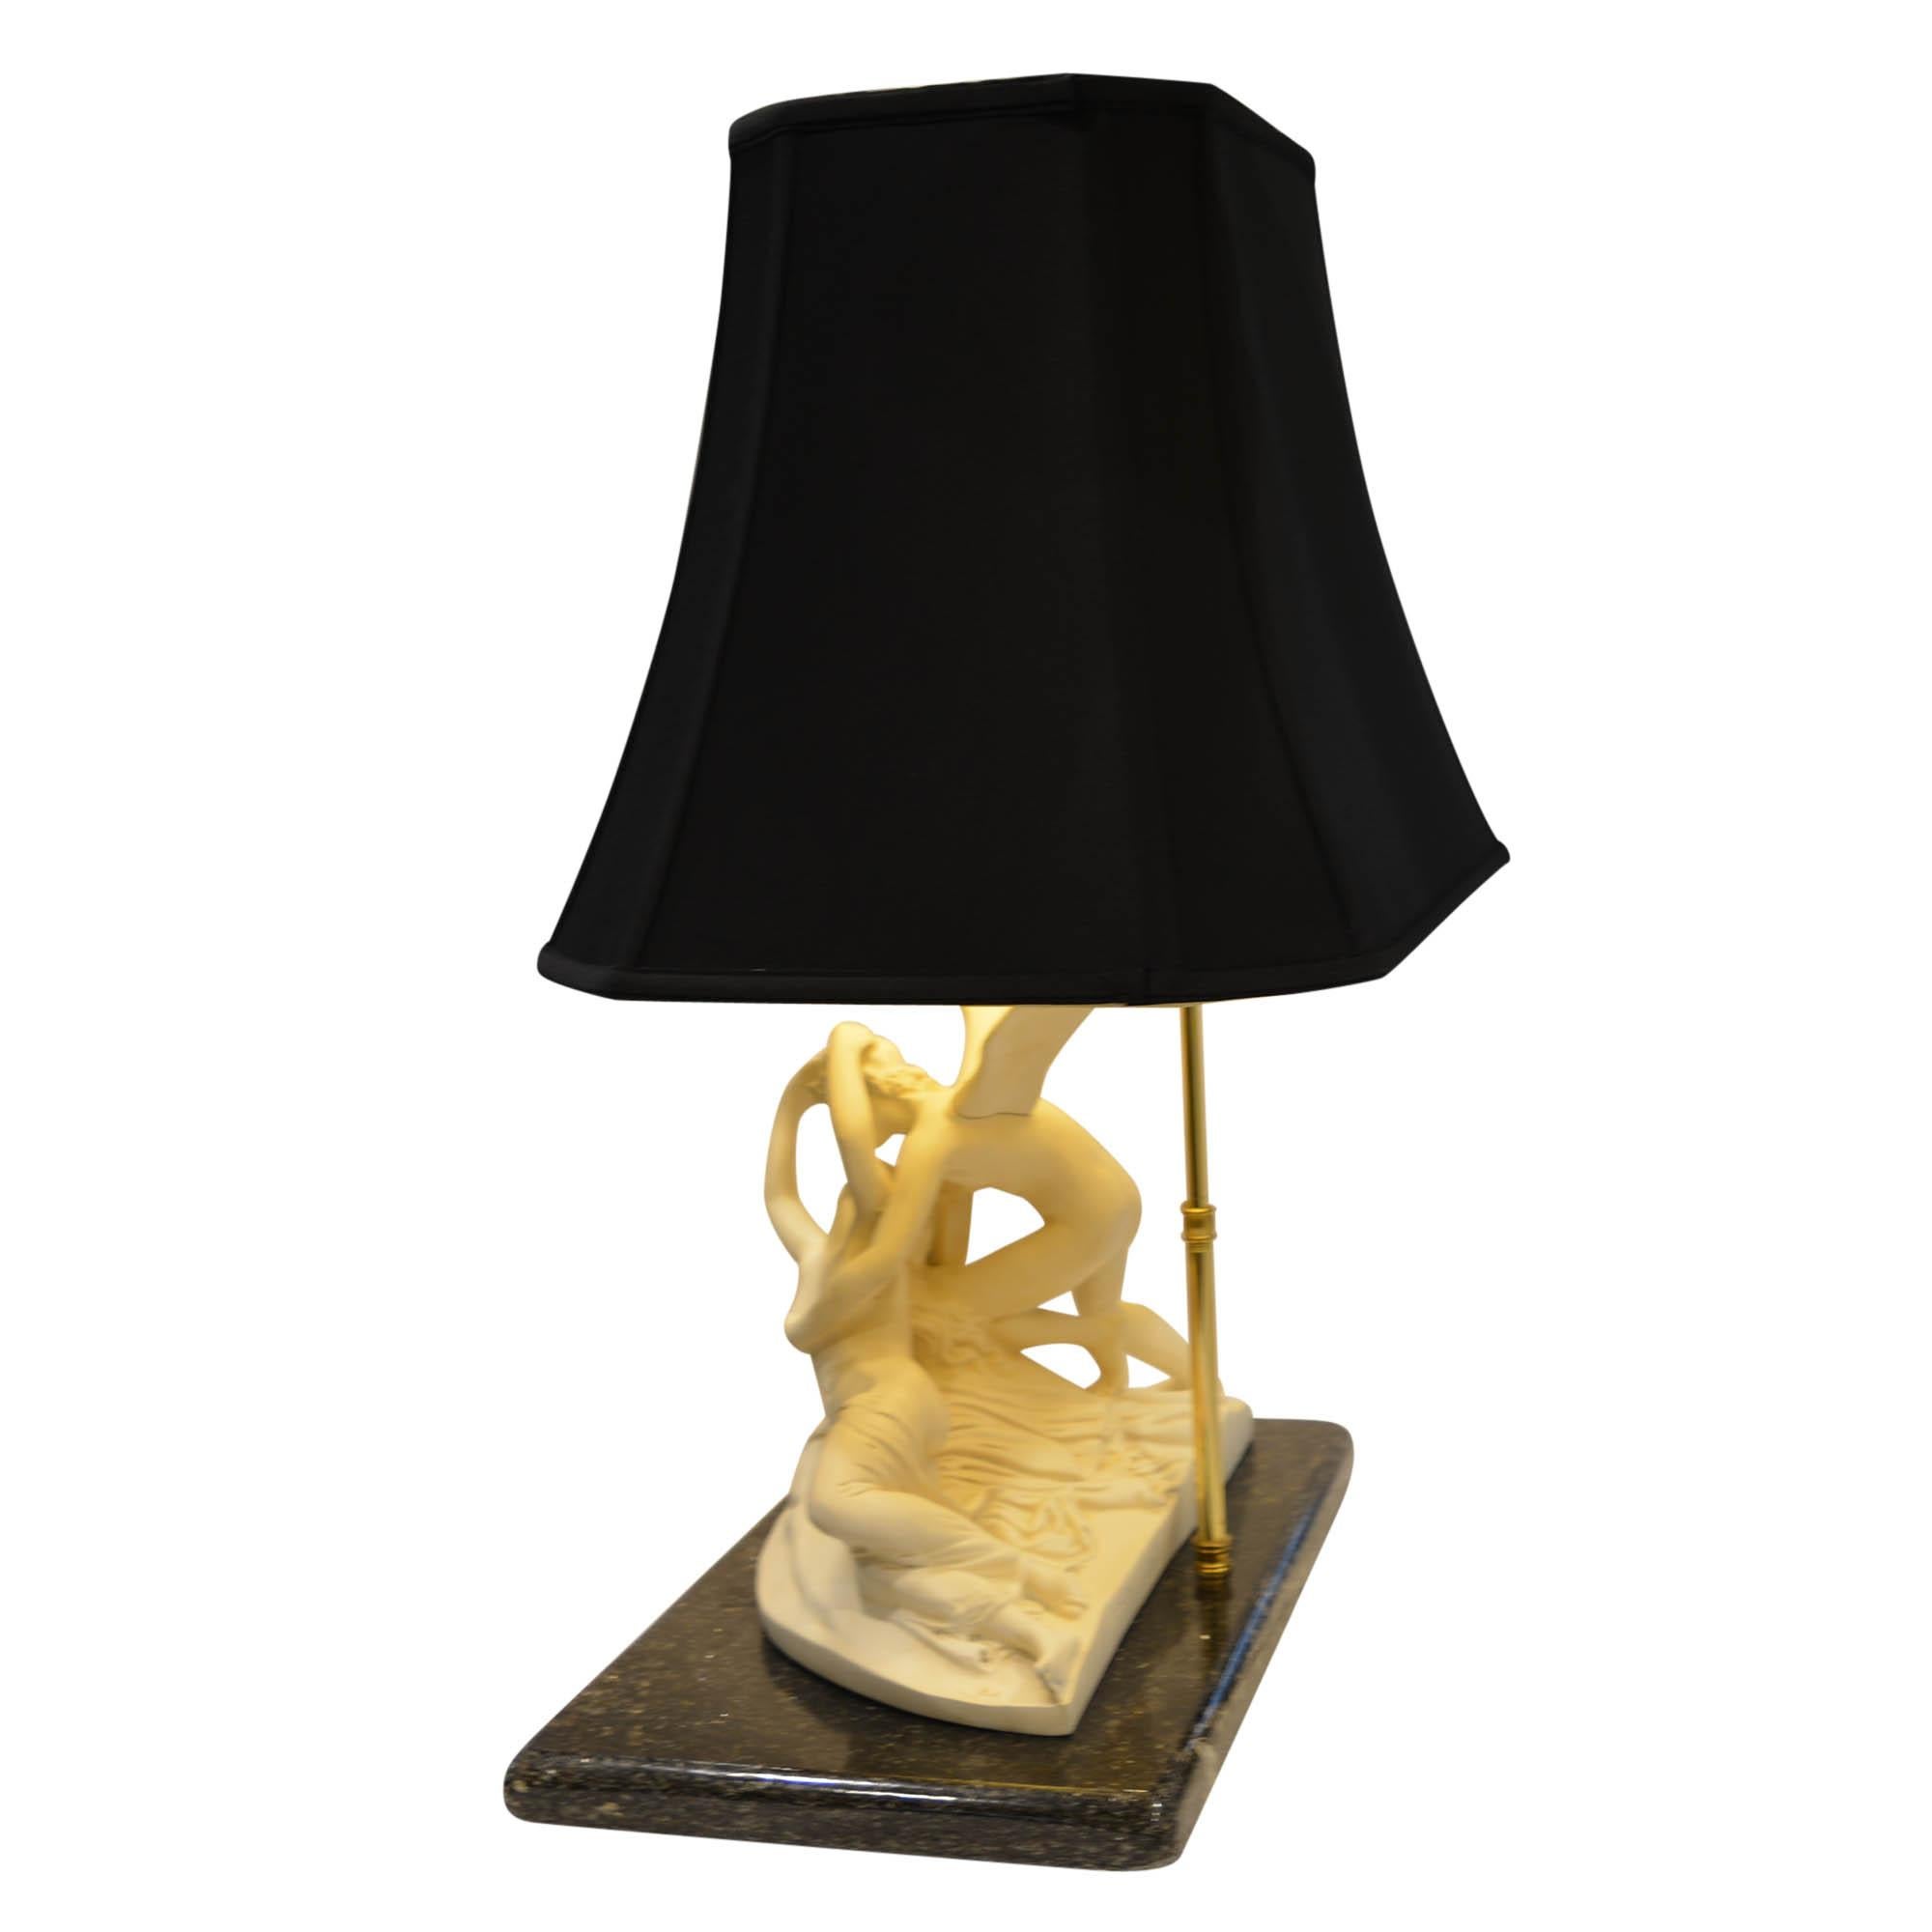 Unknown Psyche Revived by Cupid's Kiss Lamp on Marble Base Black Shade Gold Lining